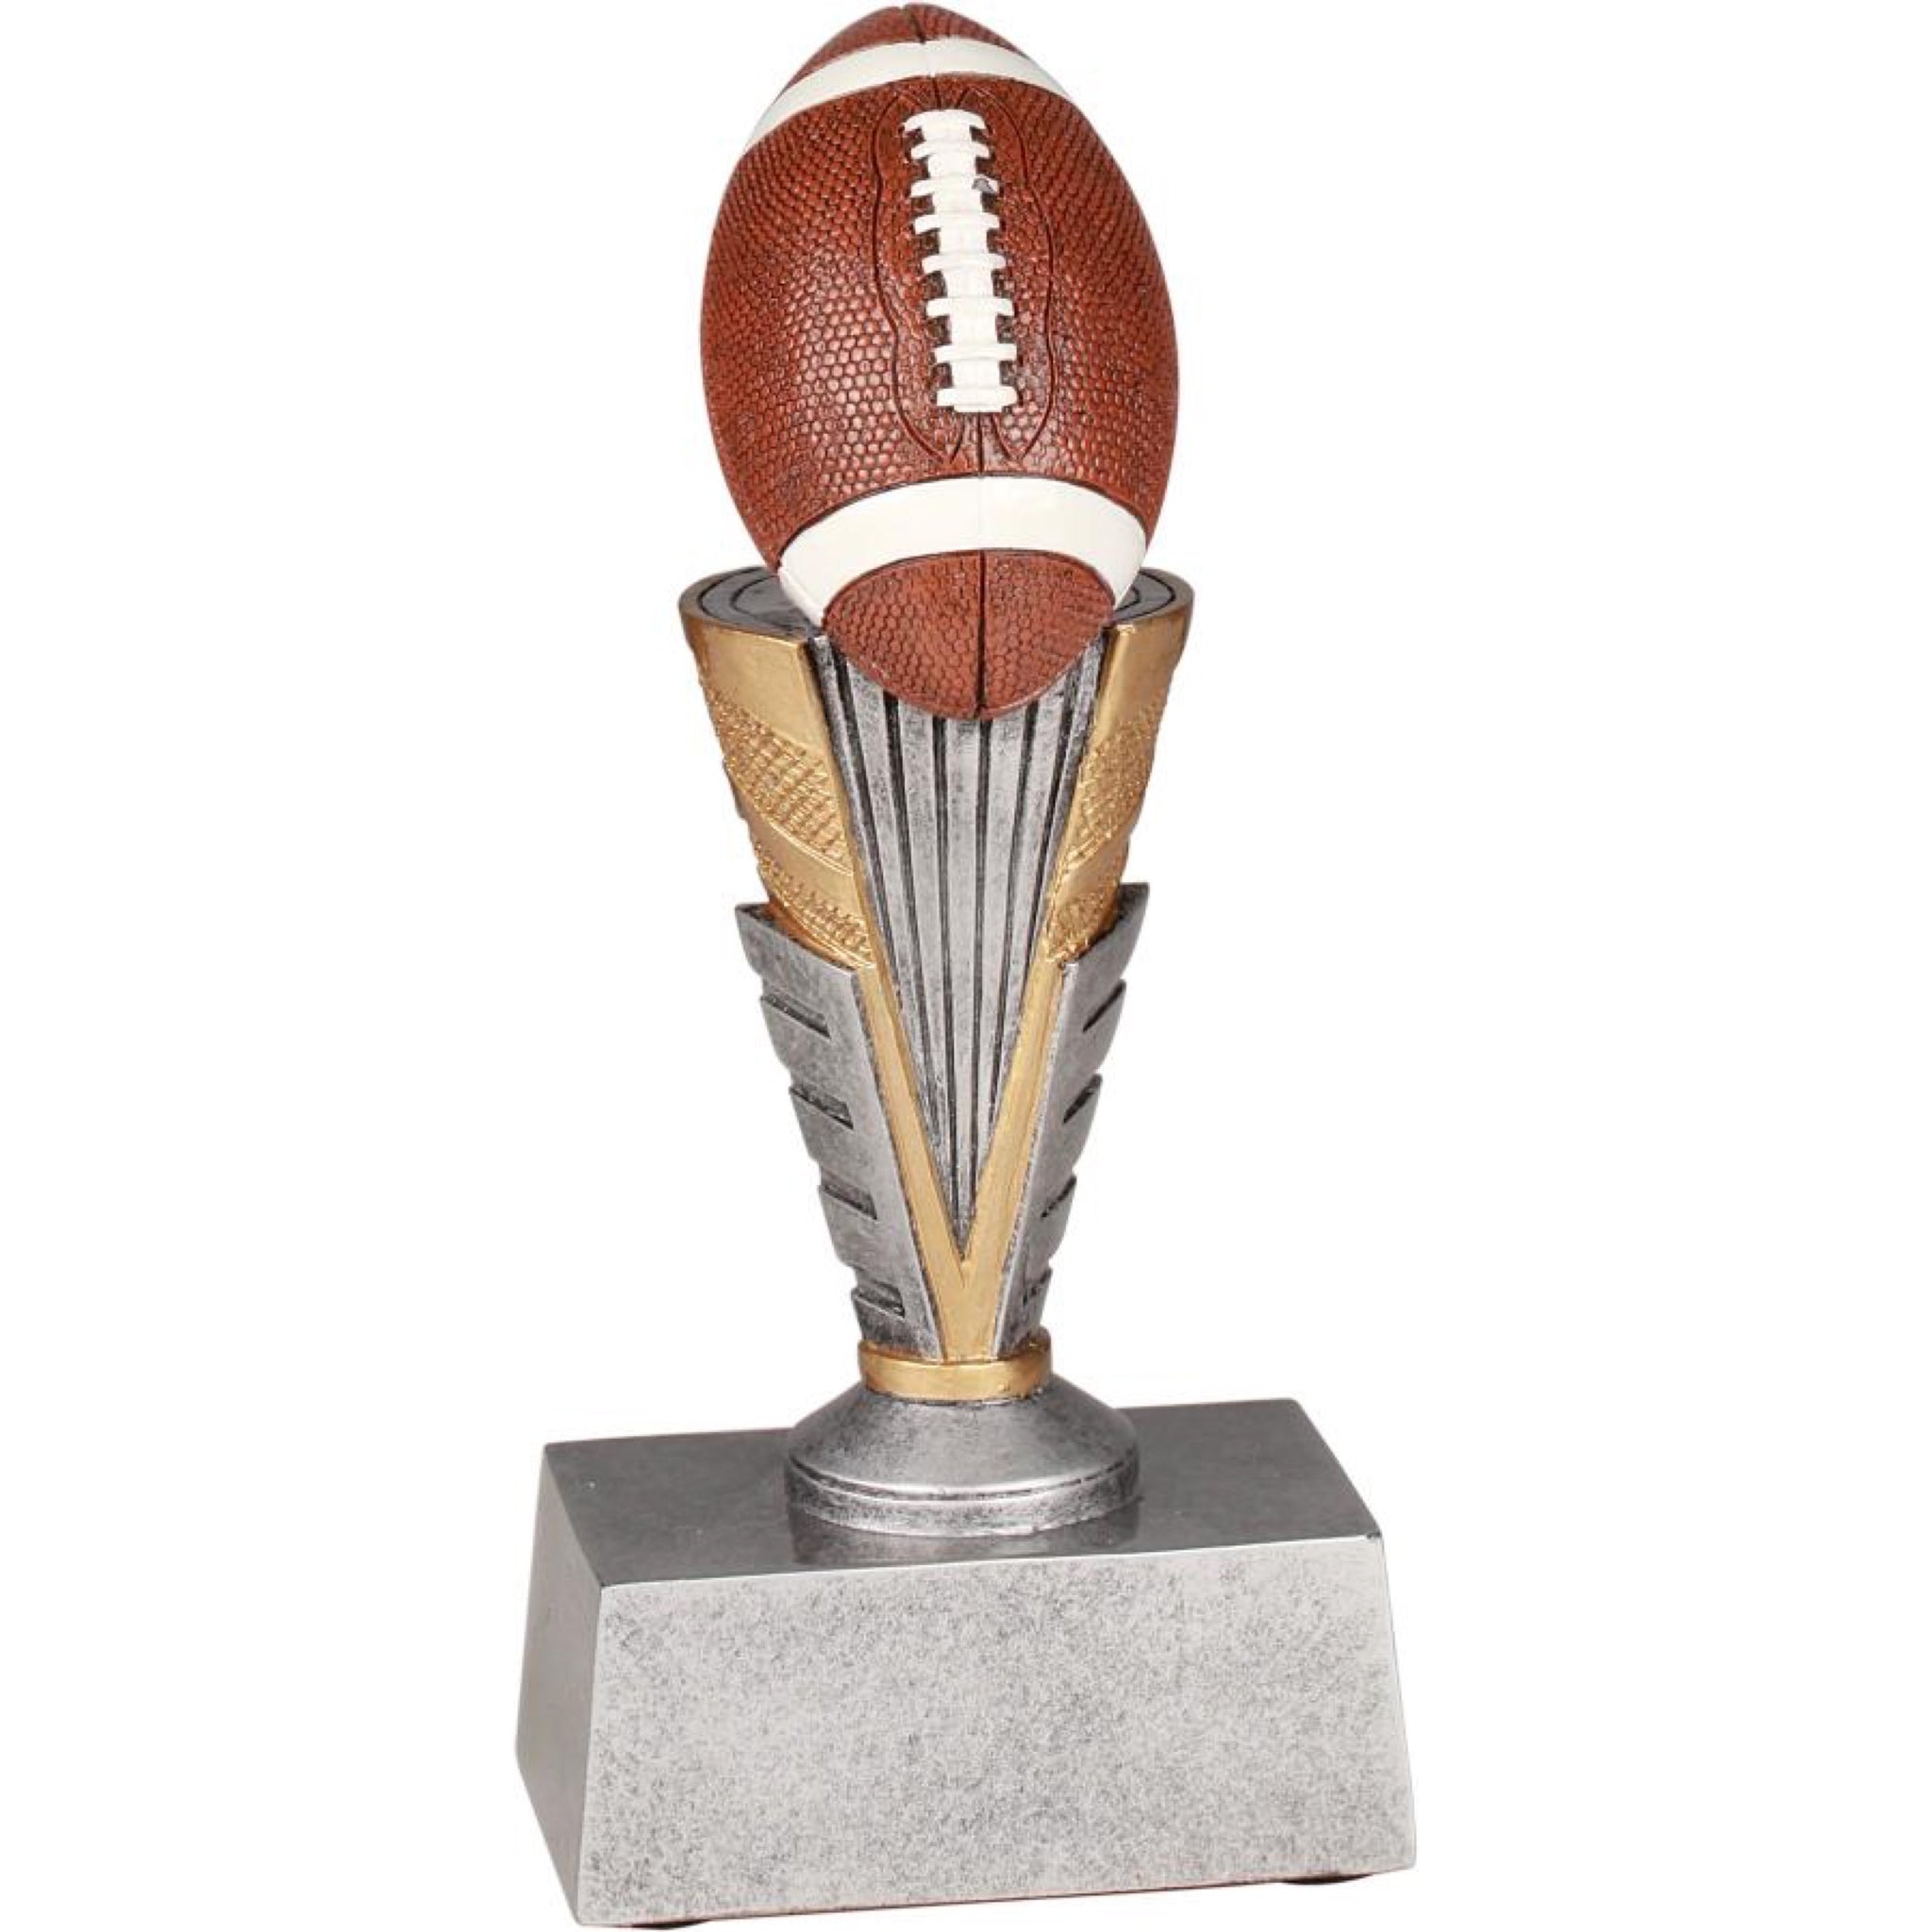 Zenith football resin featuring a silver rectangle base and a detailed silver and gold pedestal with a brown and white football sitting on top slanted downward.